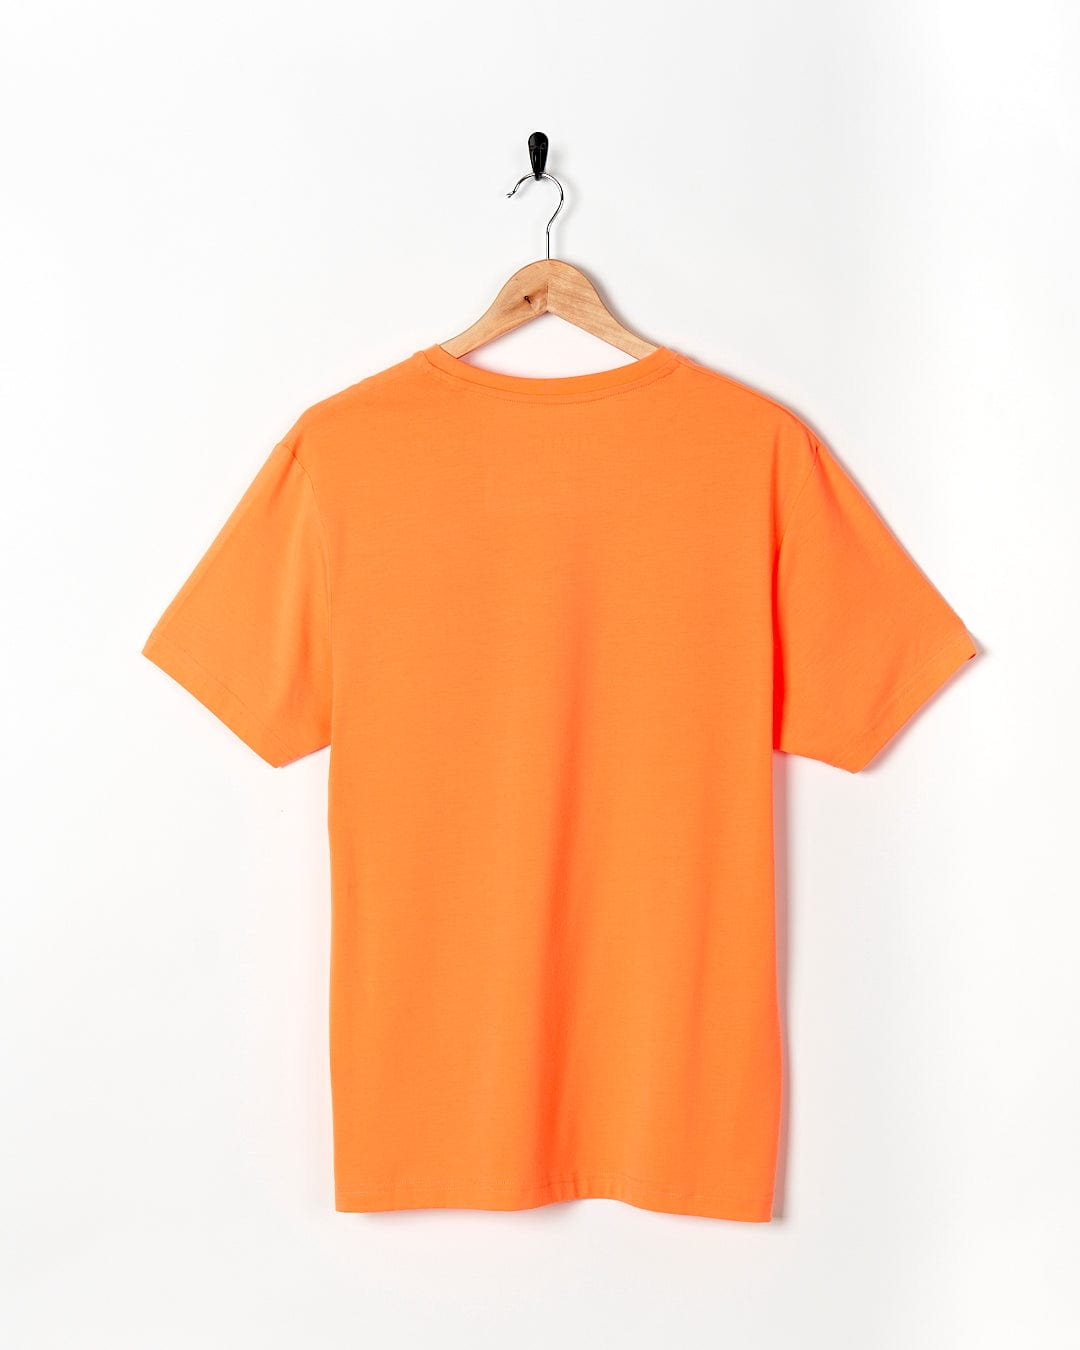 An Saltrock Flame Tri - Mens Recycled Short Sleeve T-Shirt - Light Orange hanging on a white wall.